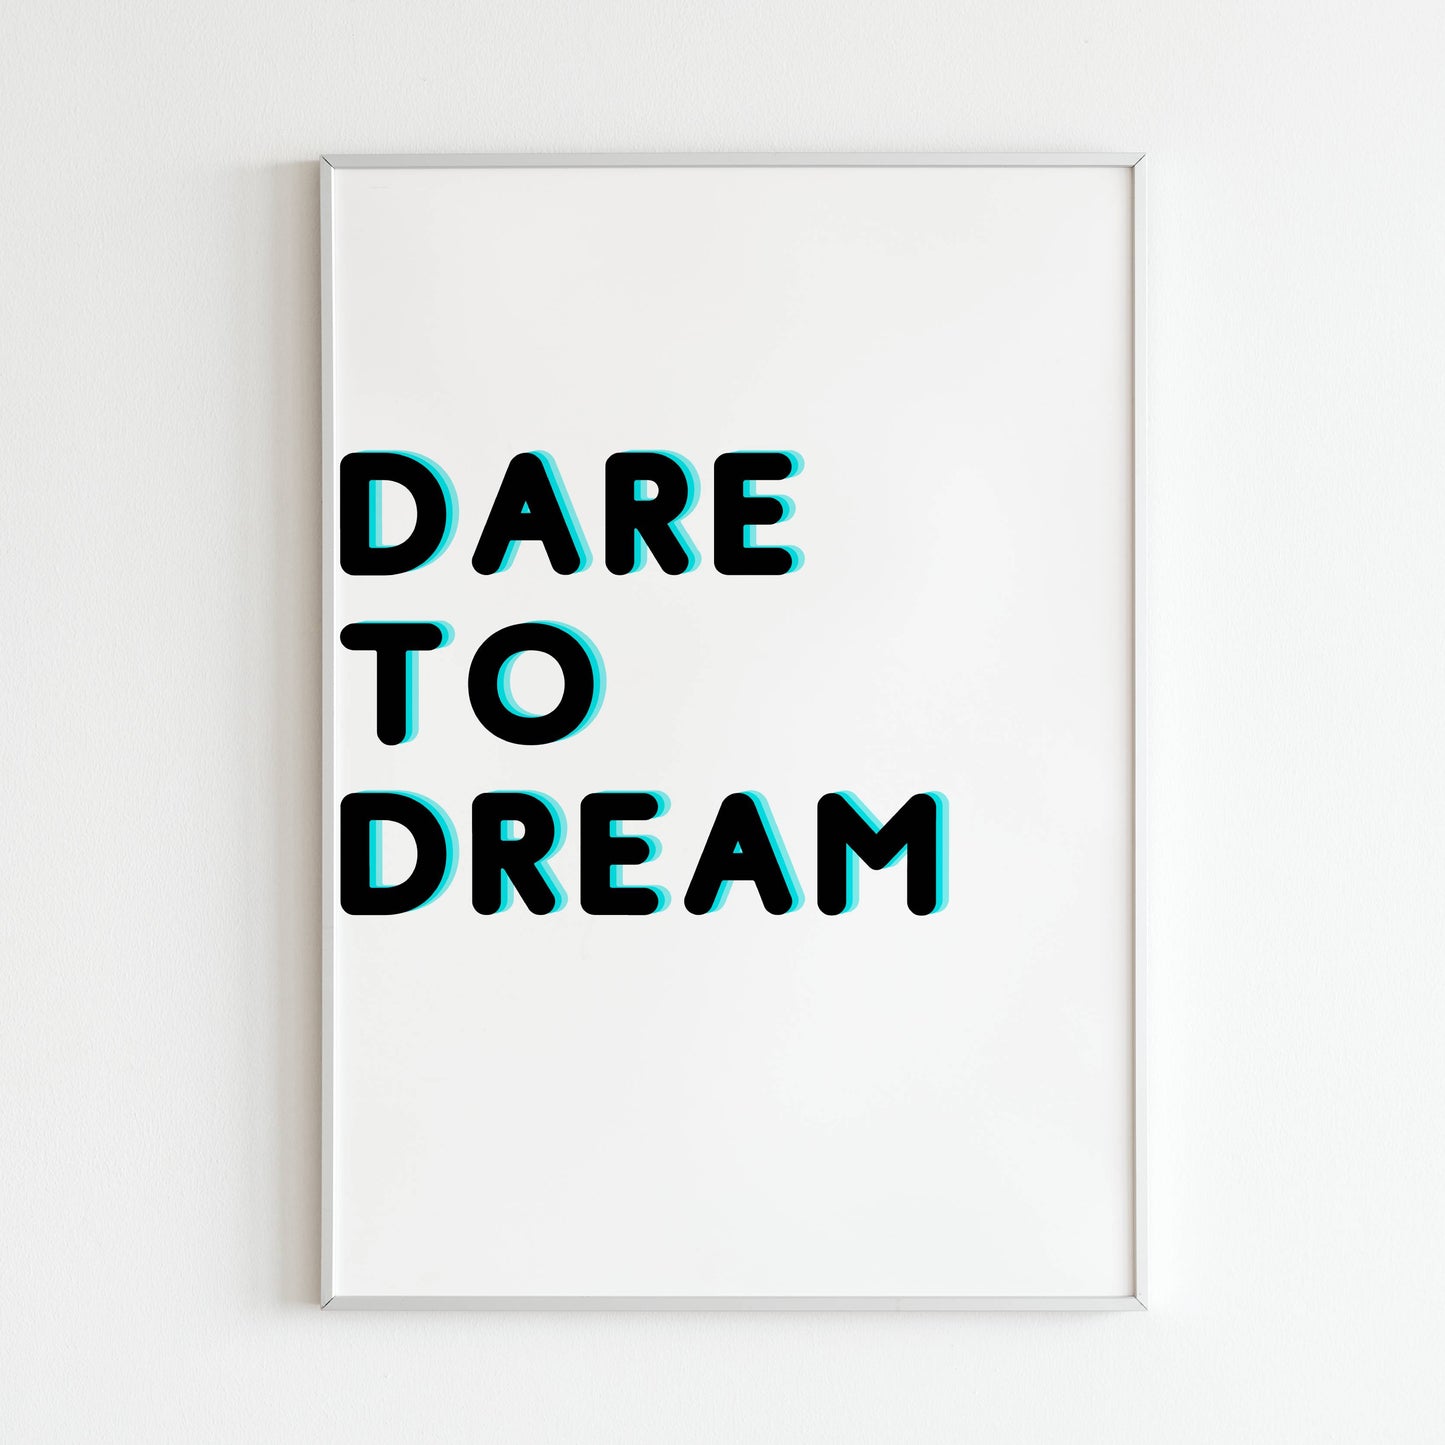 Downloadable "Dare to dream" art print, motivate yourself and others to chase their dreams.